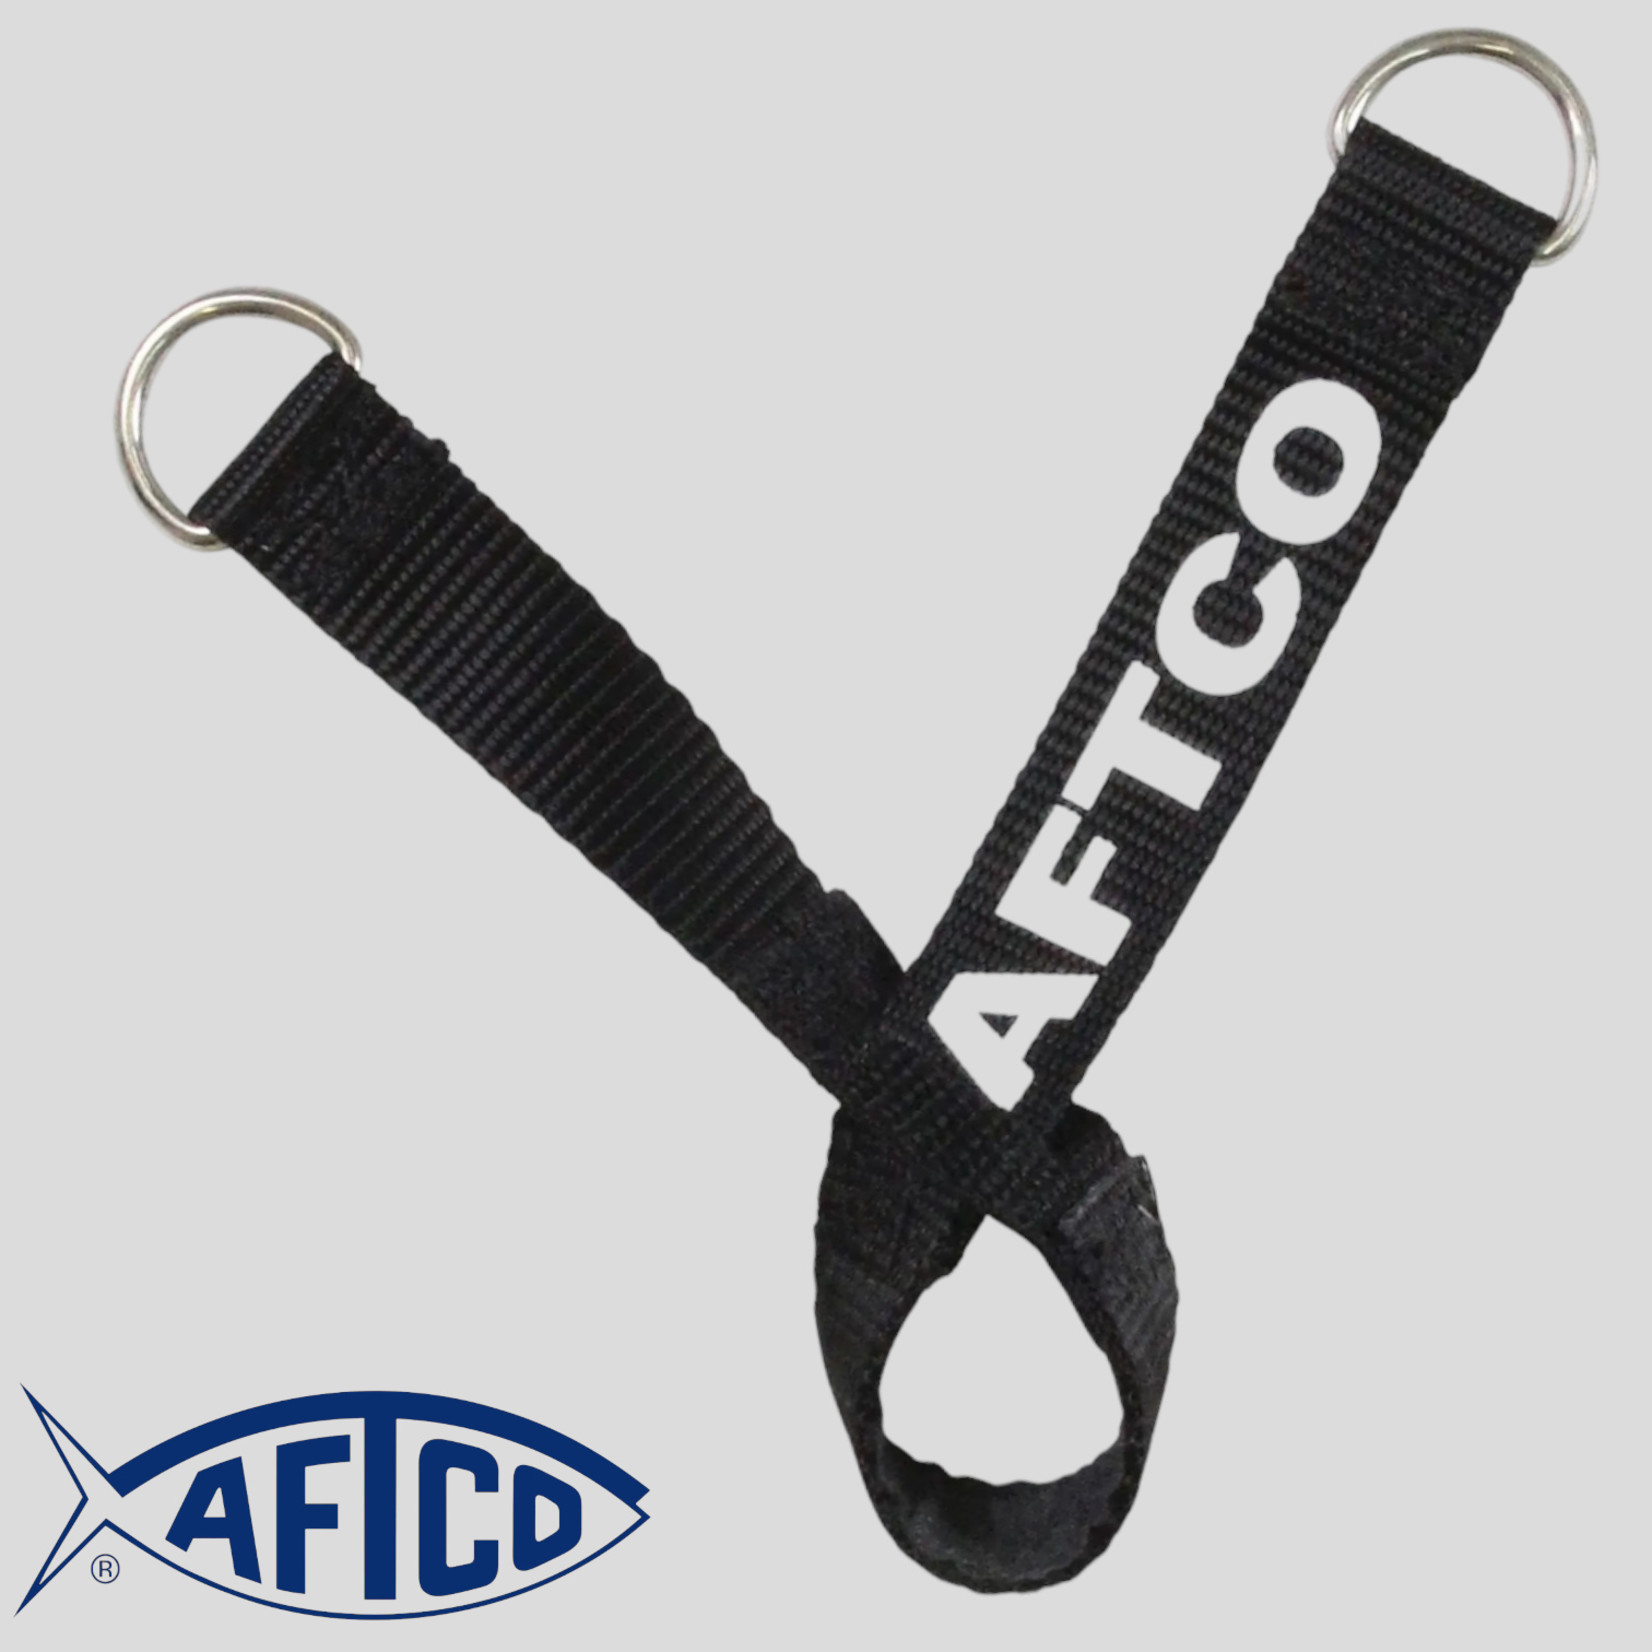 Aftco Spin Strap